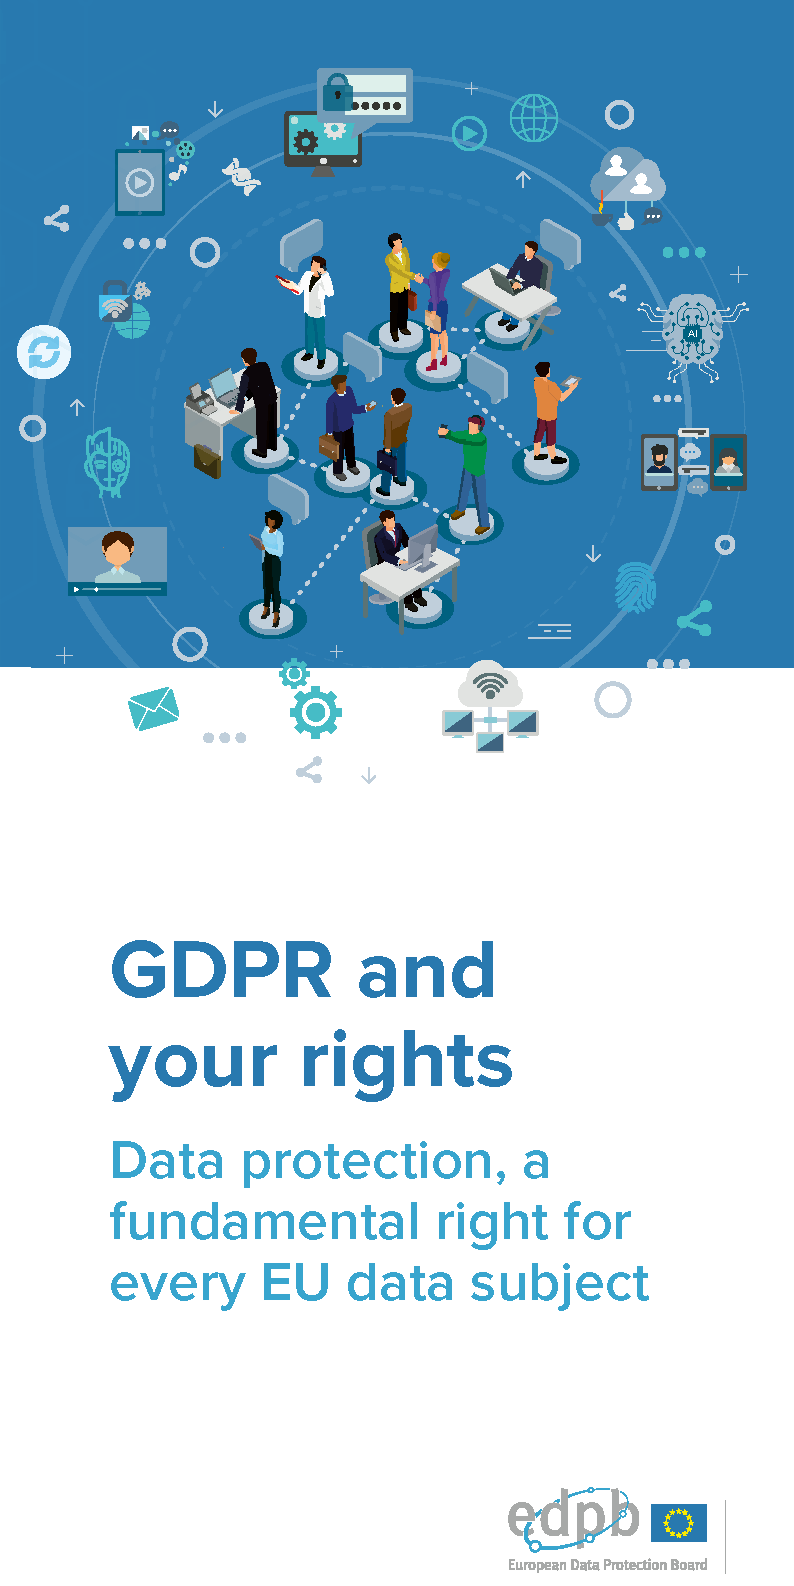 GDPR and your rights. Data protection, a fundamental right for every EU data subject